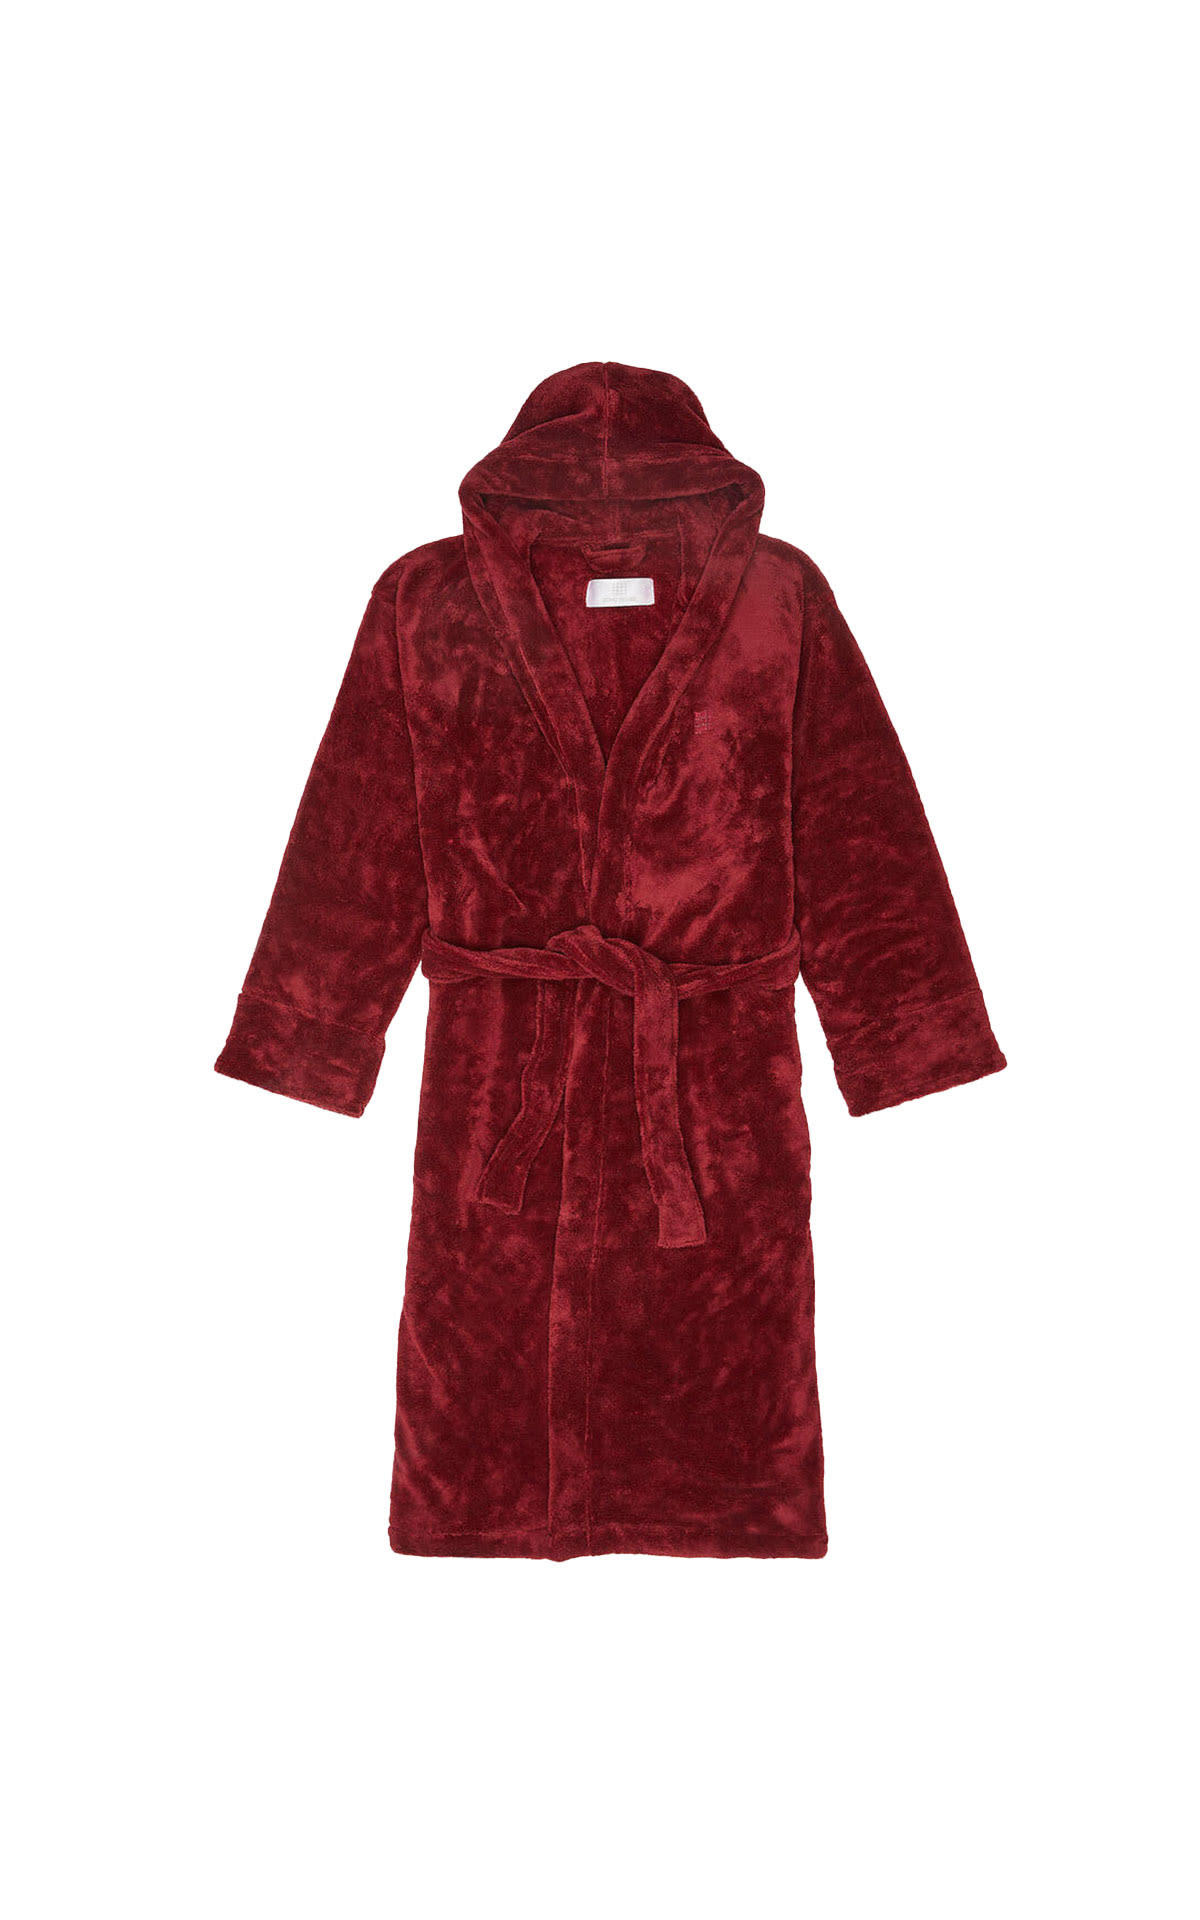 Soho home House robe  from Bicester Village